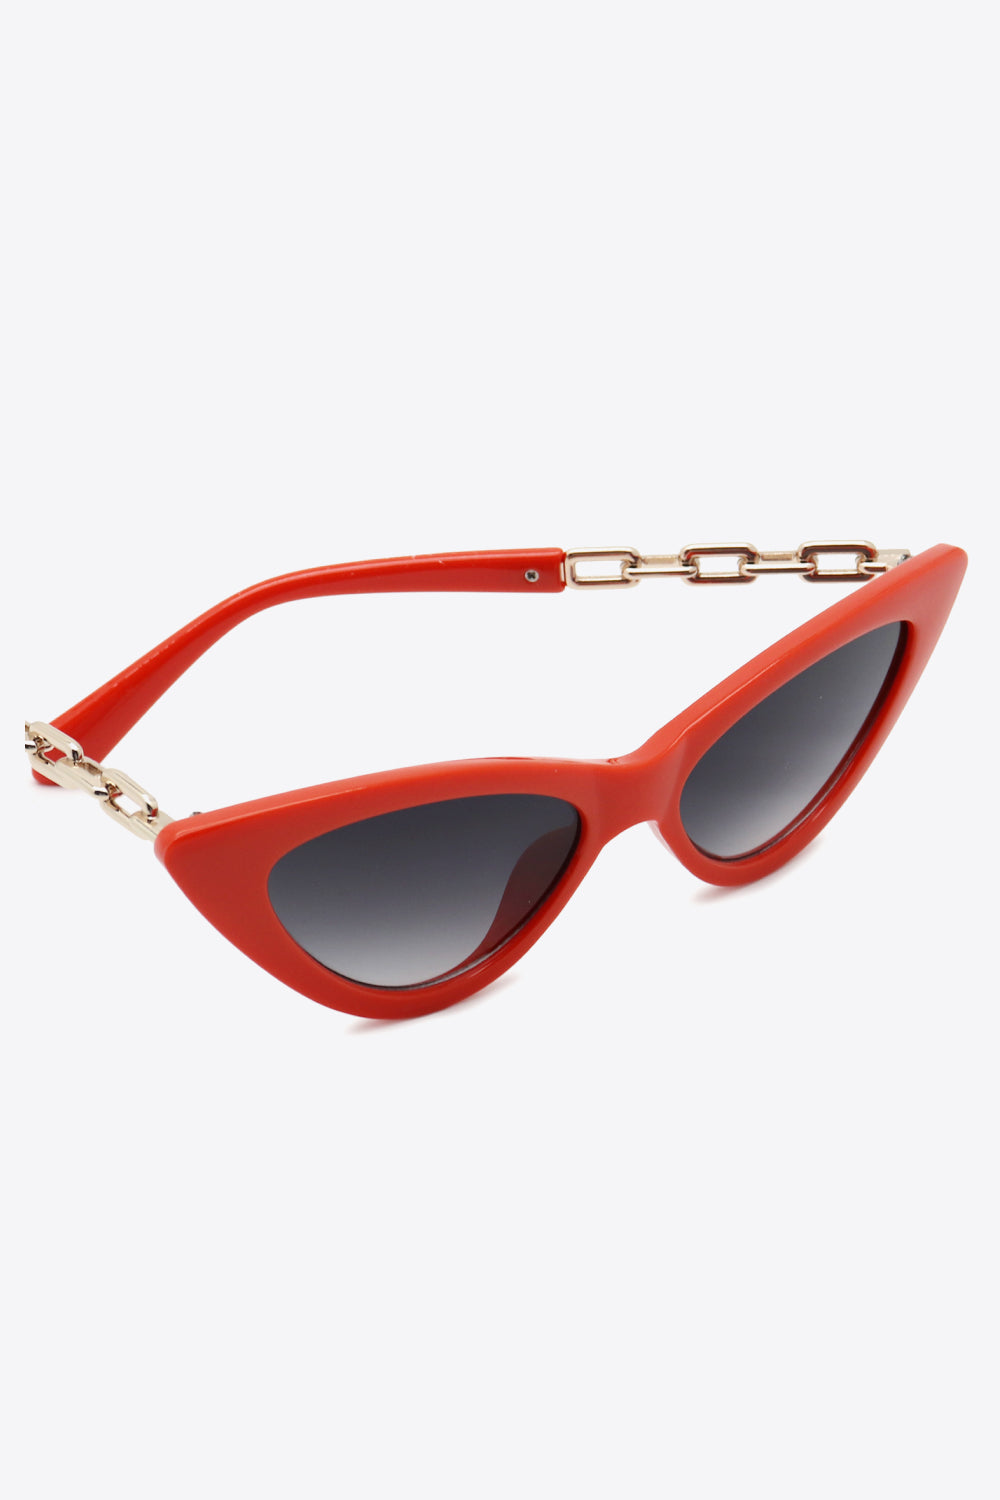 Uylee's Boutique Chain Detail Cat-Eye Sunglasses